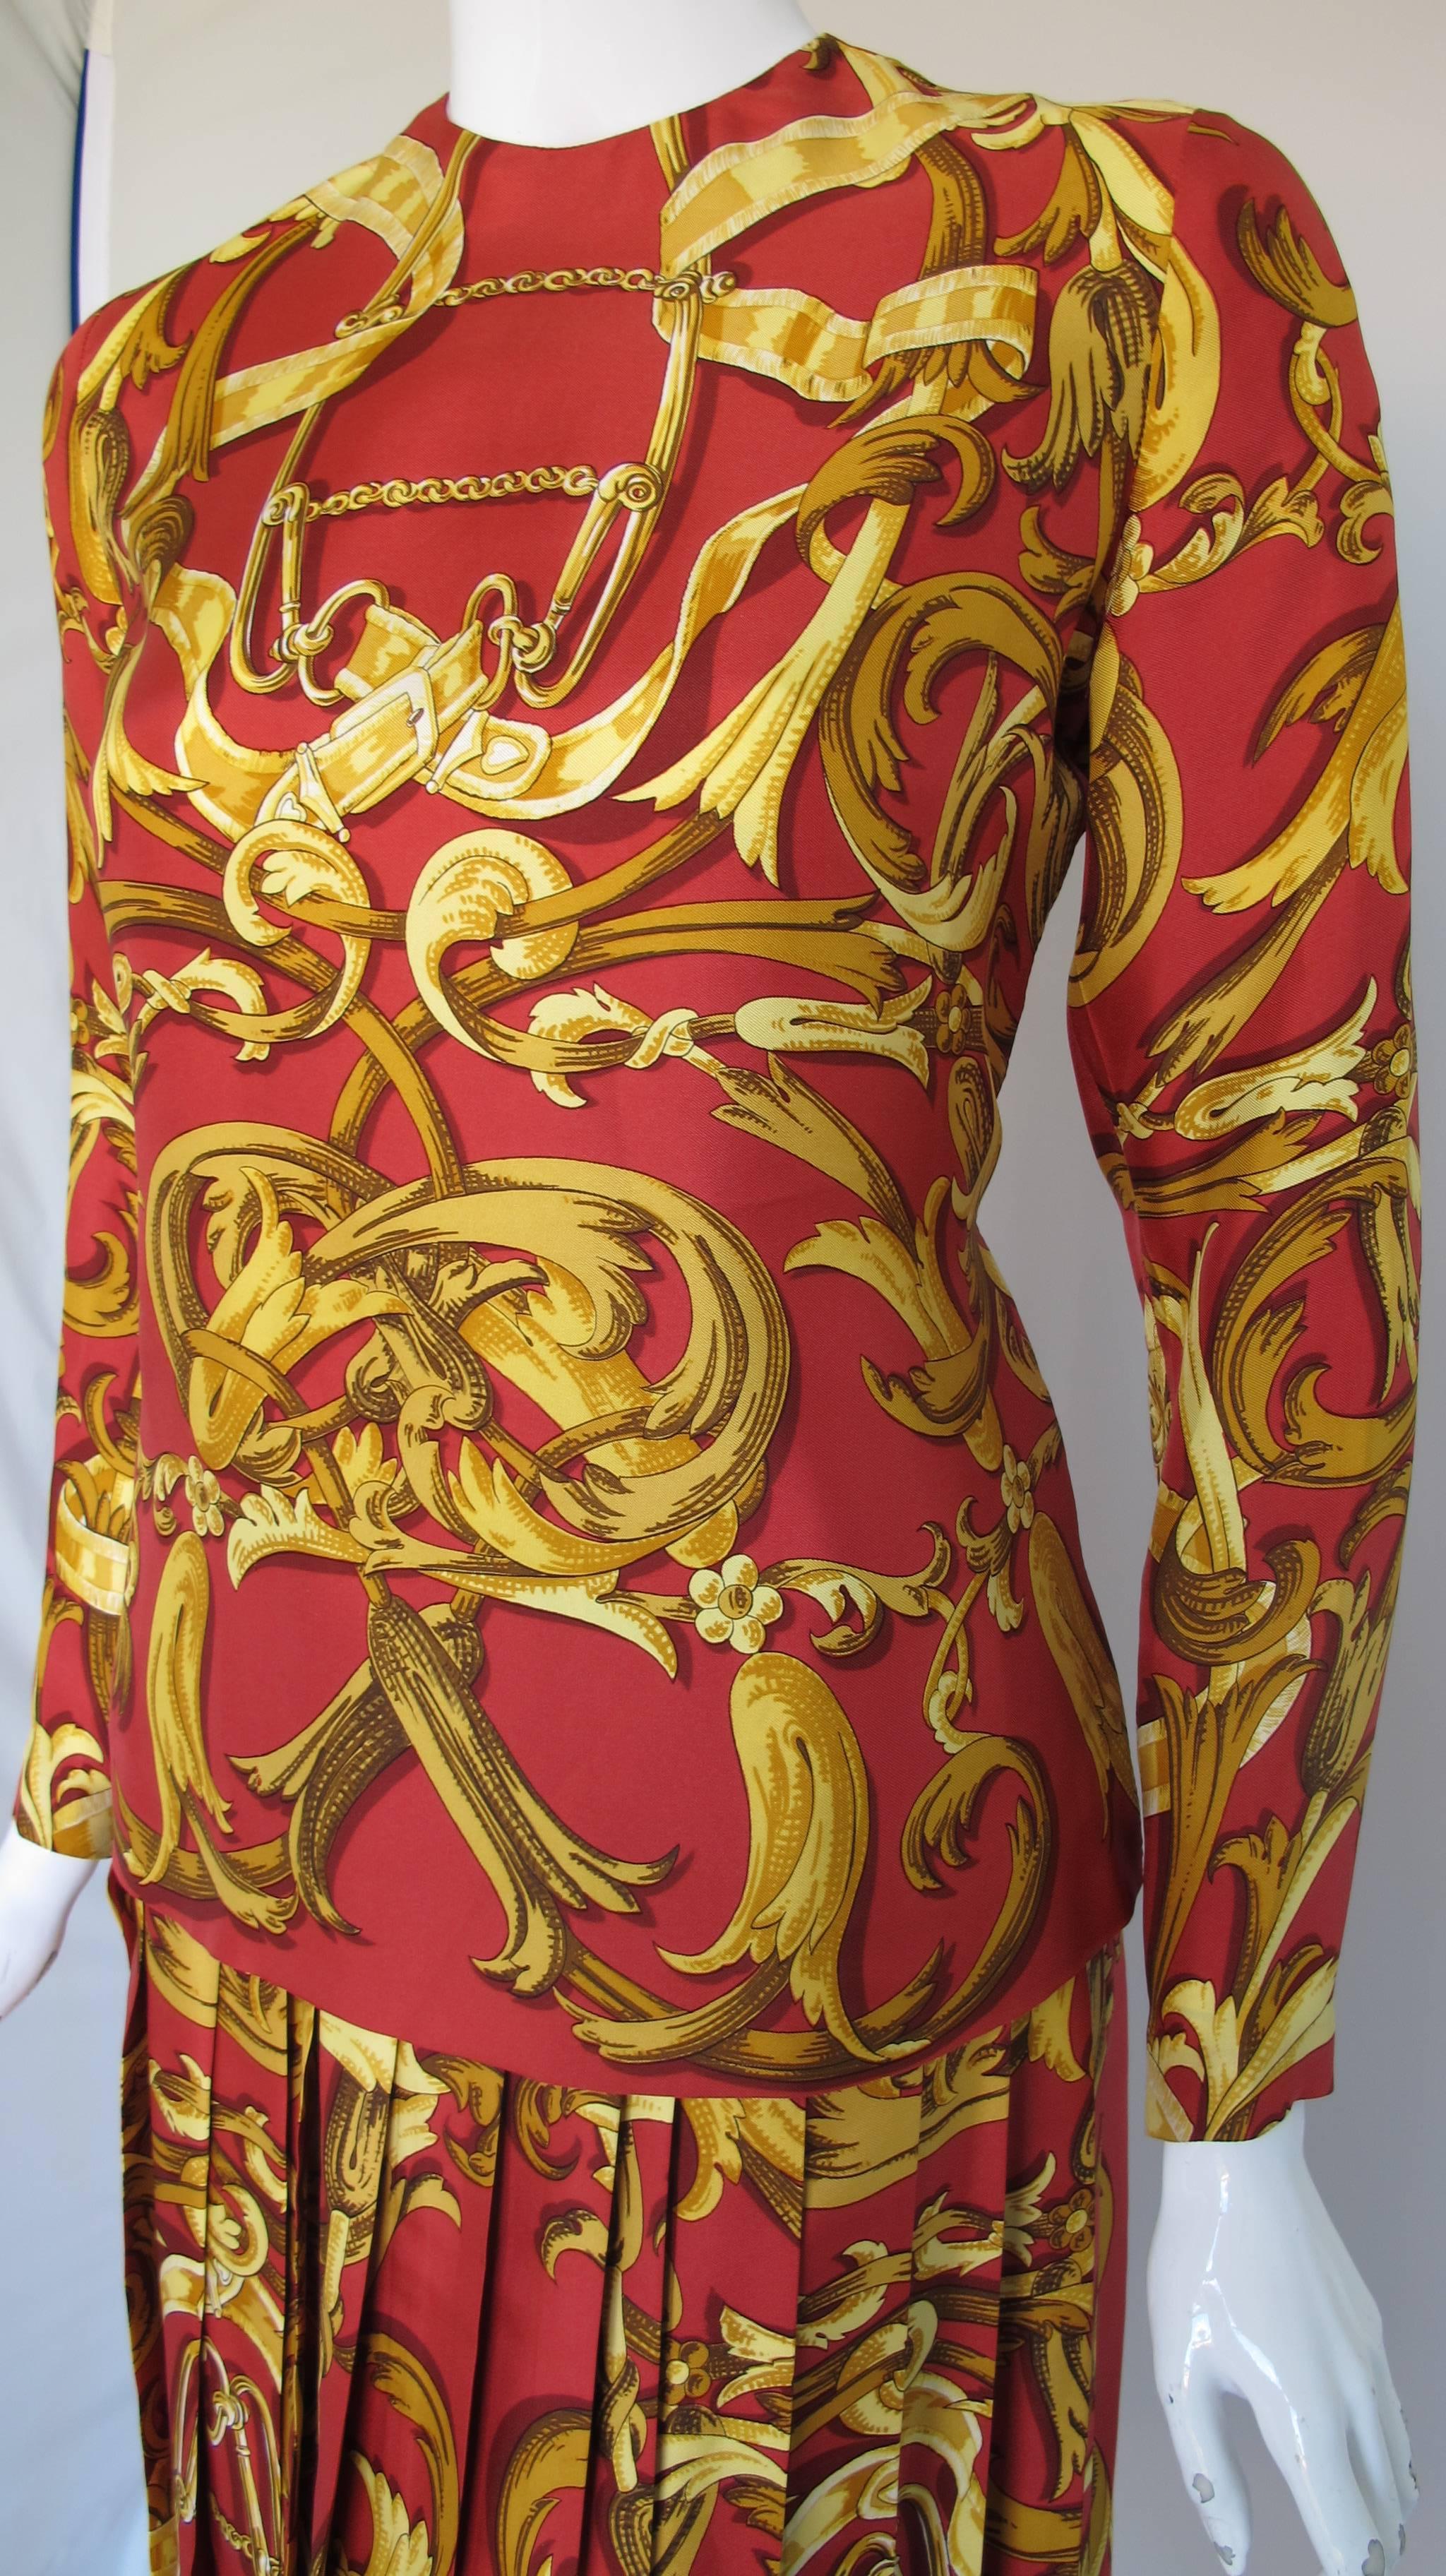 A vintage Hermes 100% silk blouse and skirt ensemble in a classic Hermes print in shades of red, yellow and gold. Ensemble consists of a long sleeved blouse that zippers at the back neck and the cuffs as well as a long pleated skirt with one hidden